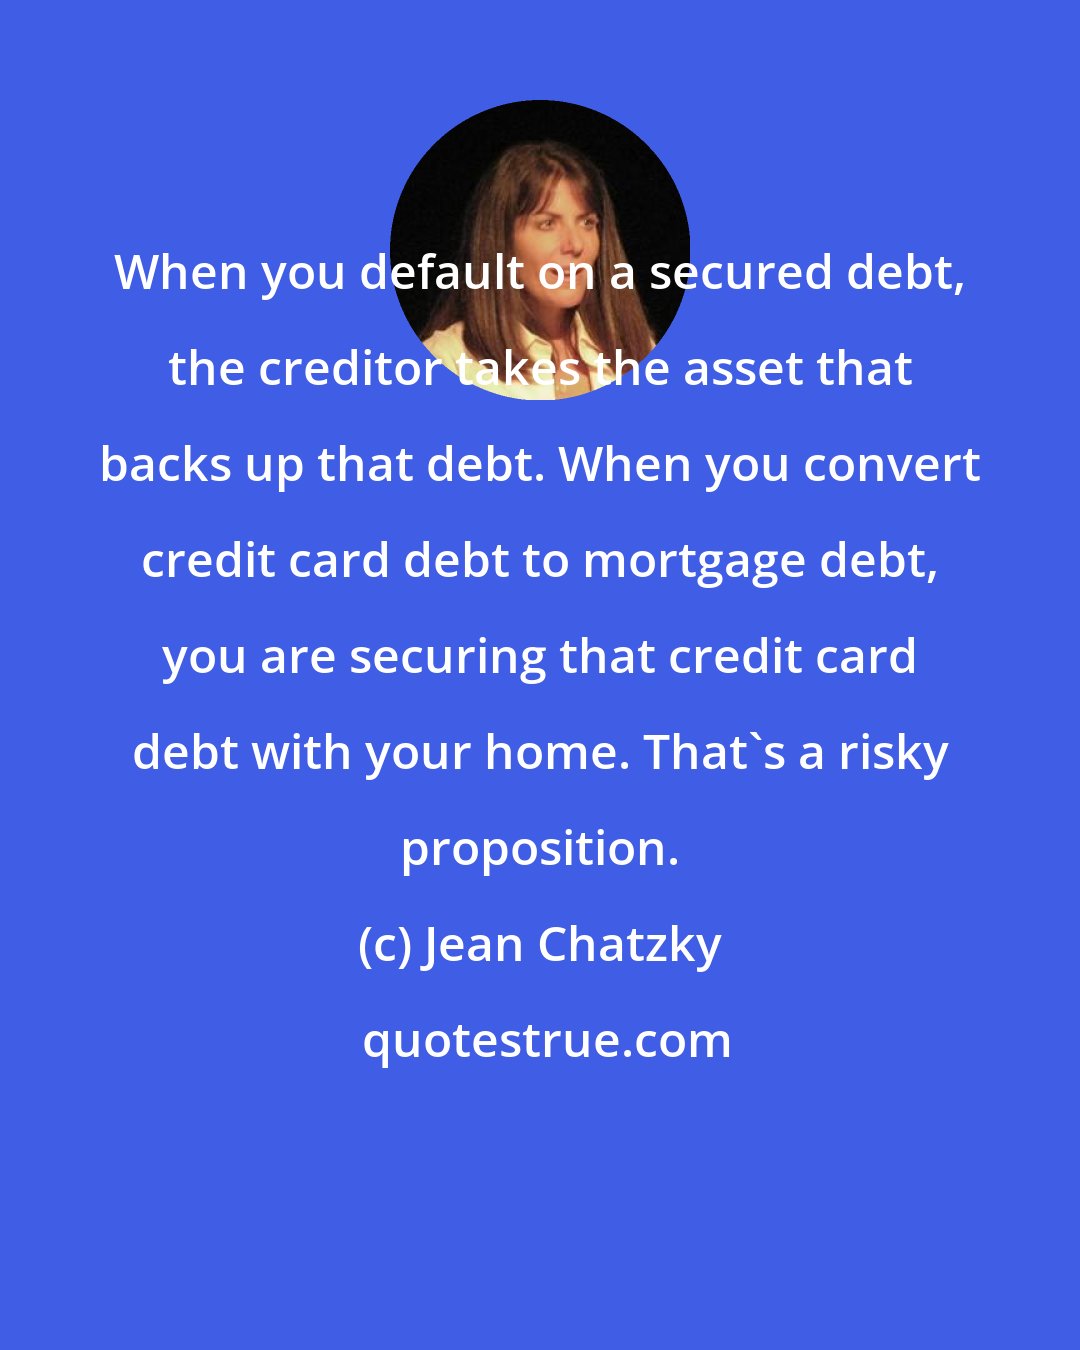 Jean Chatzky: When you default on a secured debt, the creditor takes the asset that backs up that debt. When you convert credit card debt to mortgage debt, you are securing that credit card debt with your home. That's a risky proposition.